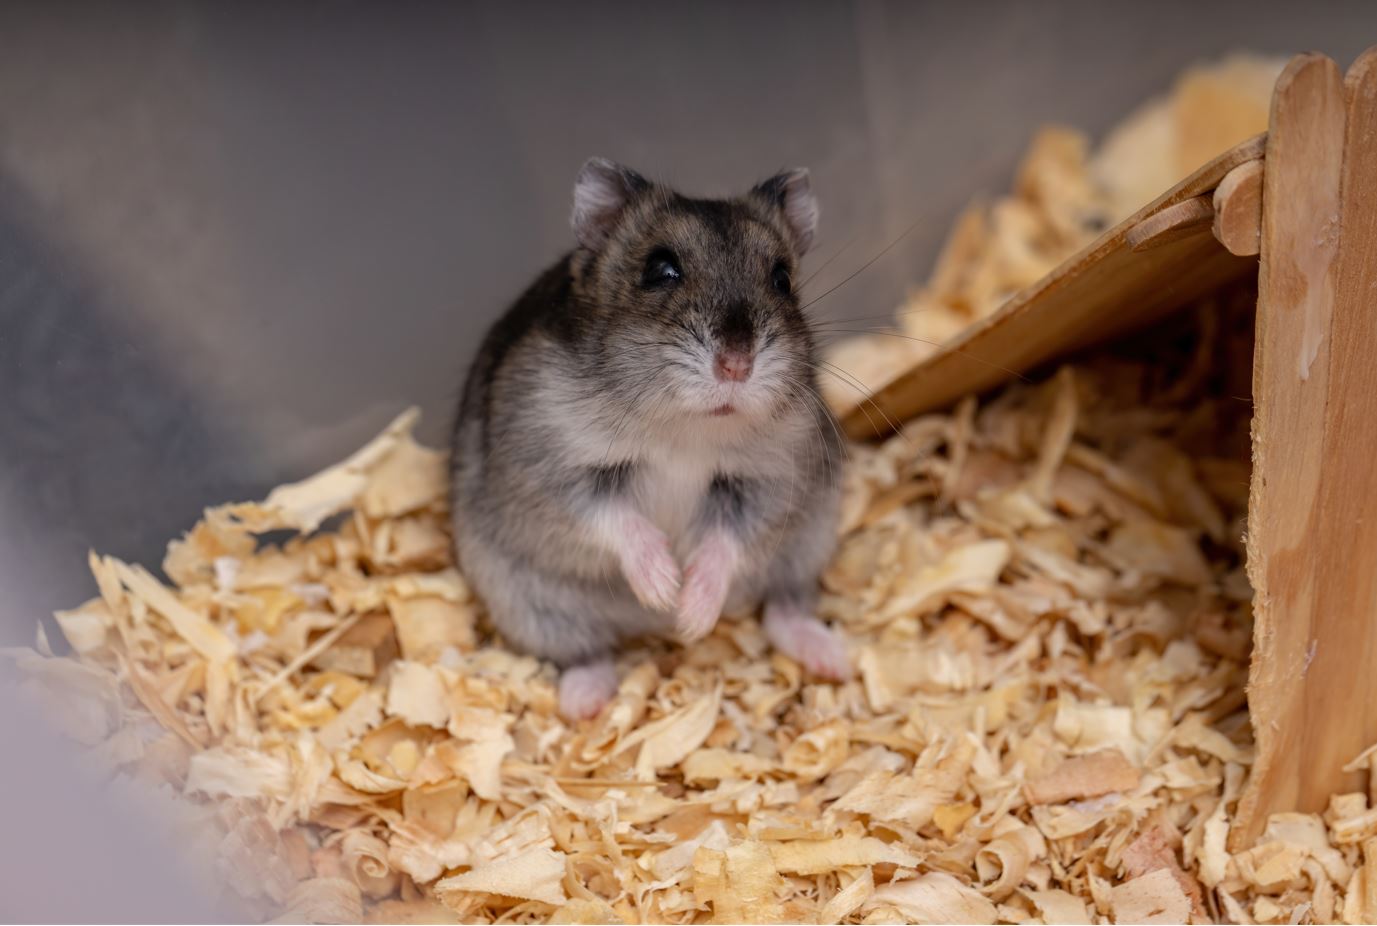 Hong Kong orders hamster cull after Covid outbreak